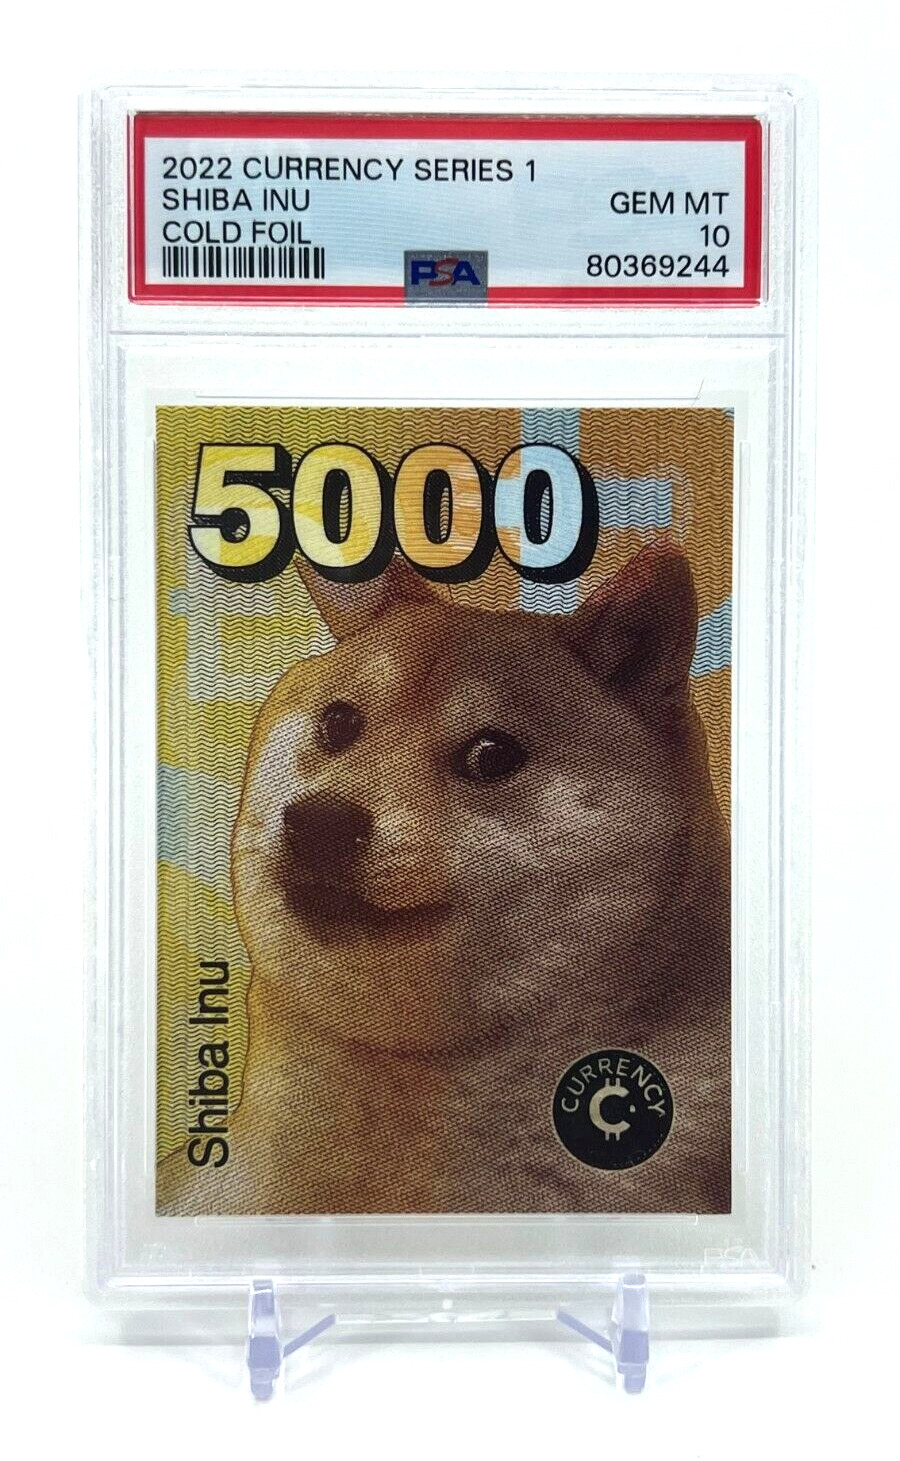 2022 Cardsmiths Currency Series 1 Shiba Inu Cold Foil PSA 10